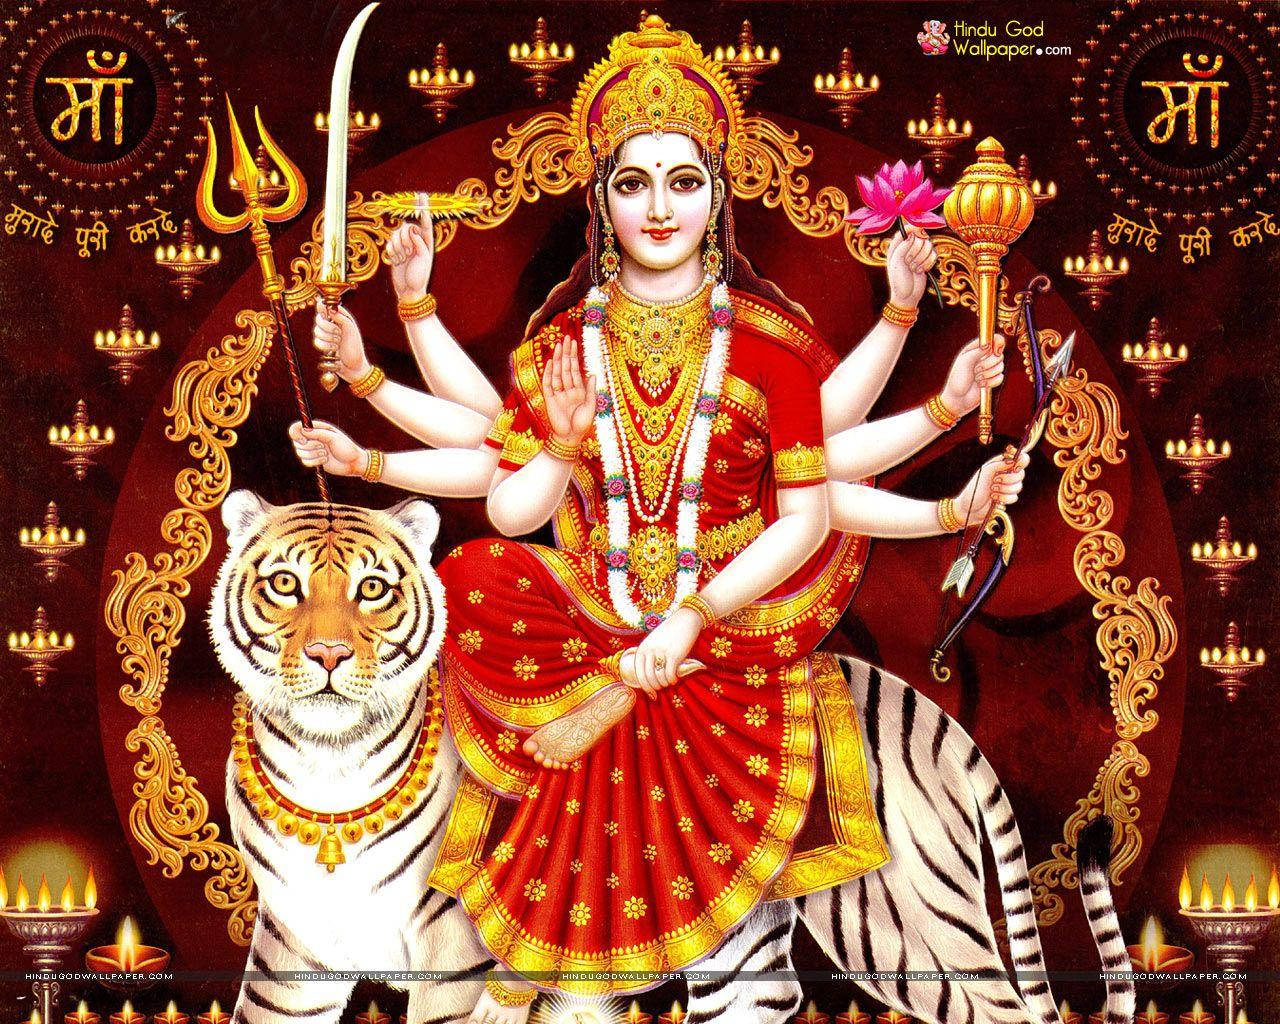 Vaishno Devi Holding A Sword And A Bow